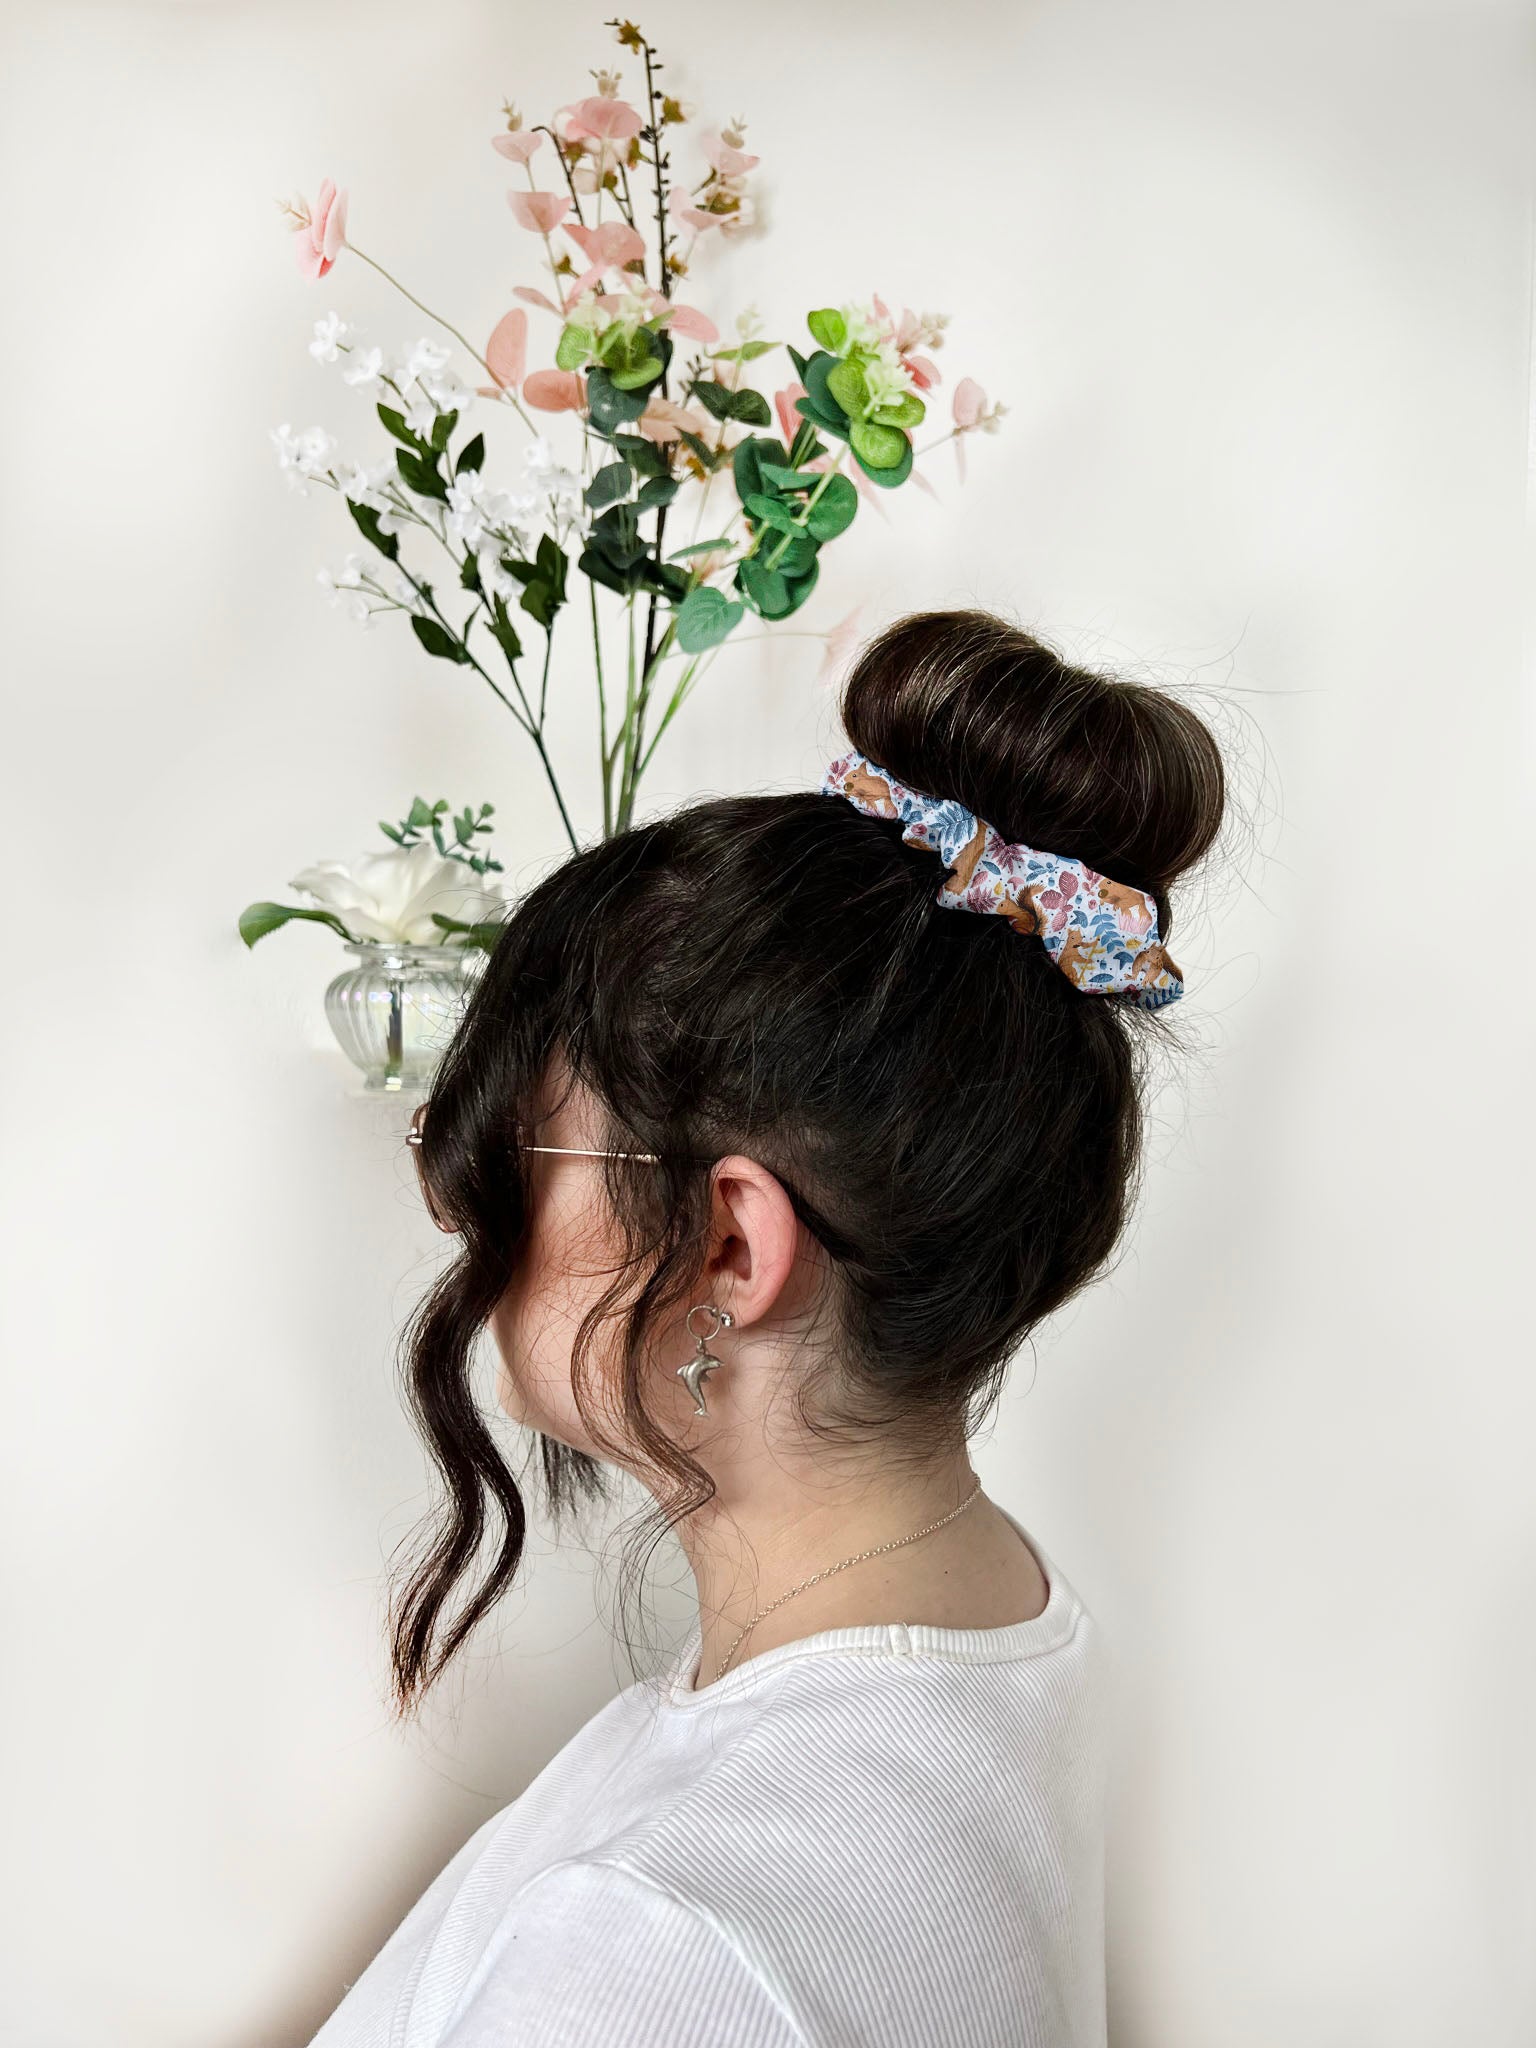 red squirrel scrunchie in back of hair of dark haired girl. She is stood facing sideways with plants behind her.